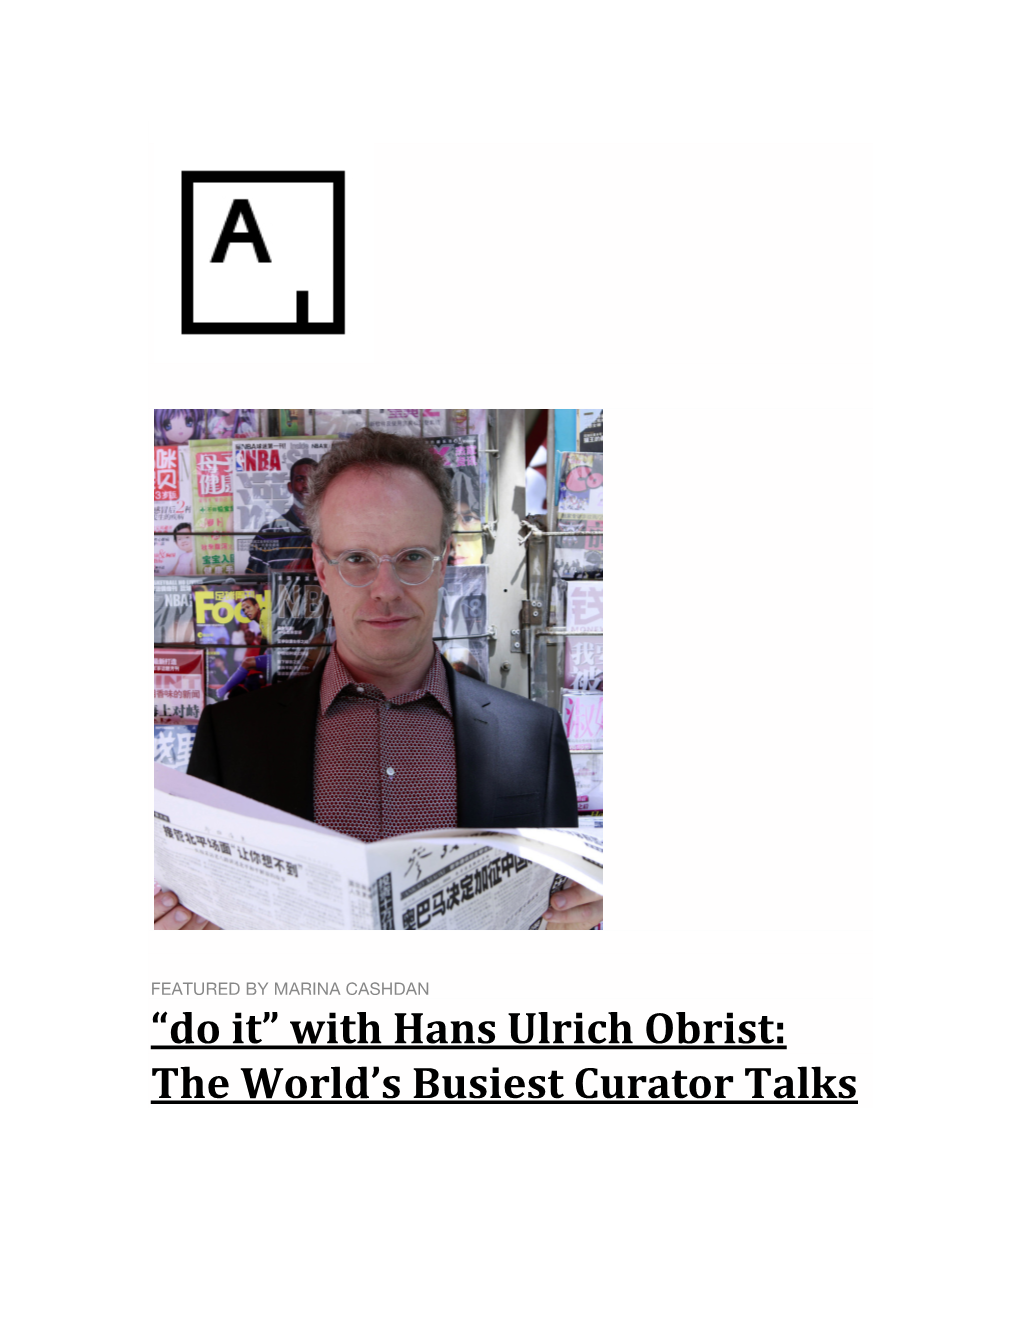 “Do It” with Hans Ulrich Obrist: the World's Busiest Curator Talks